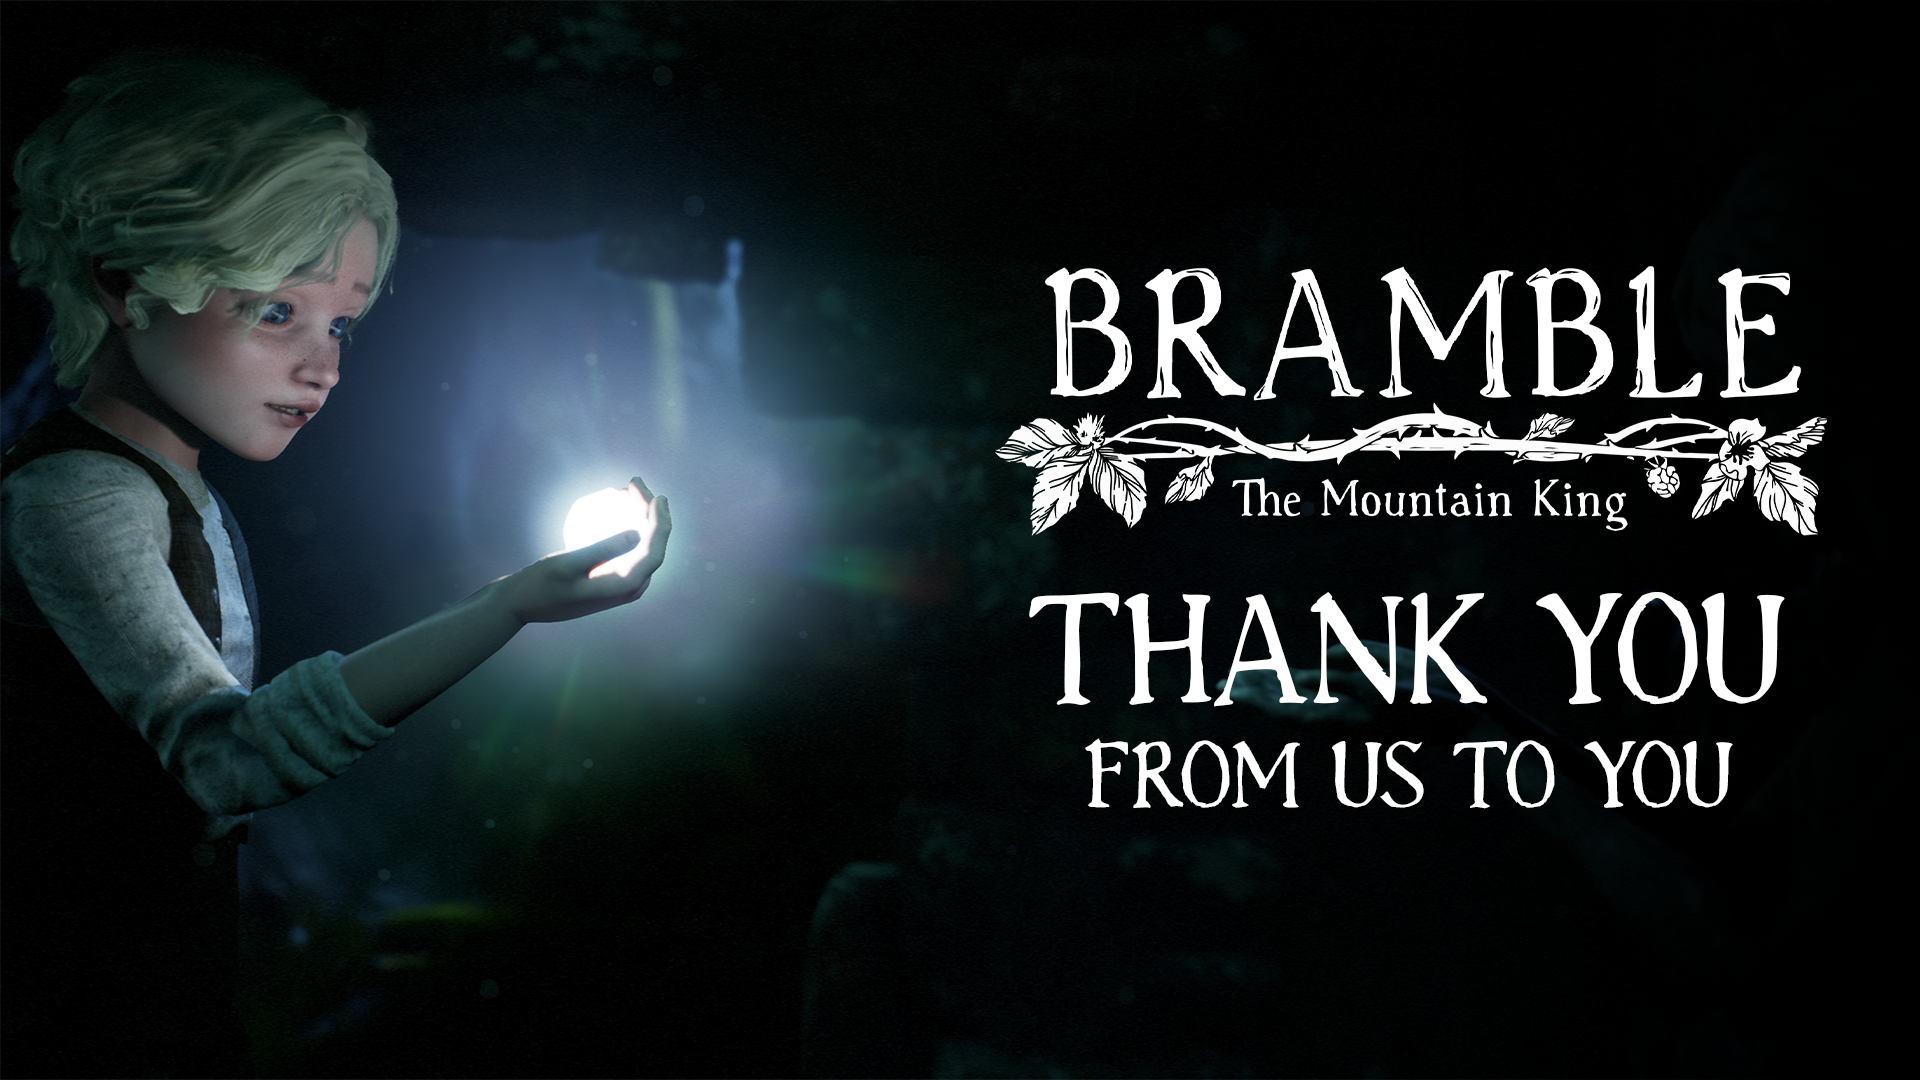 A Thank You from us to you